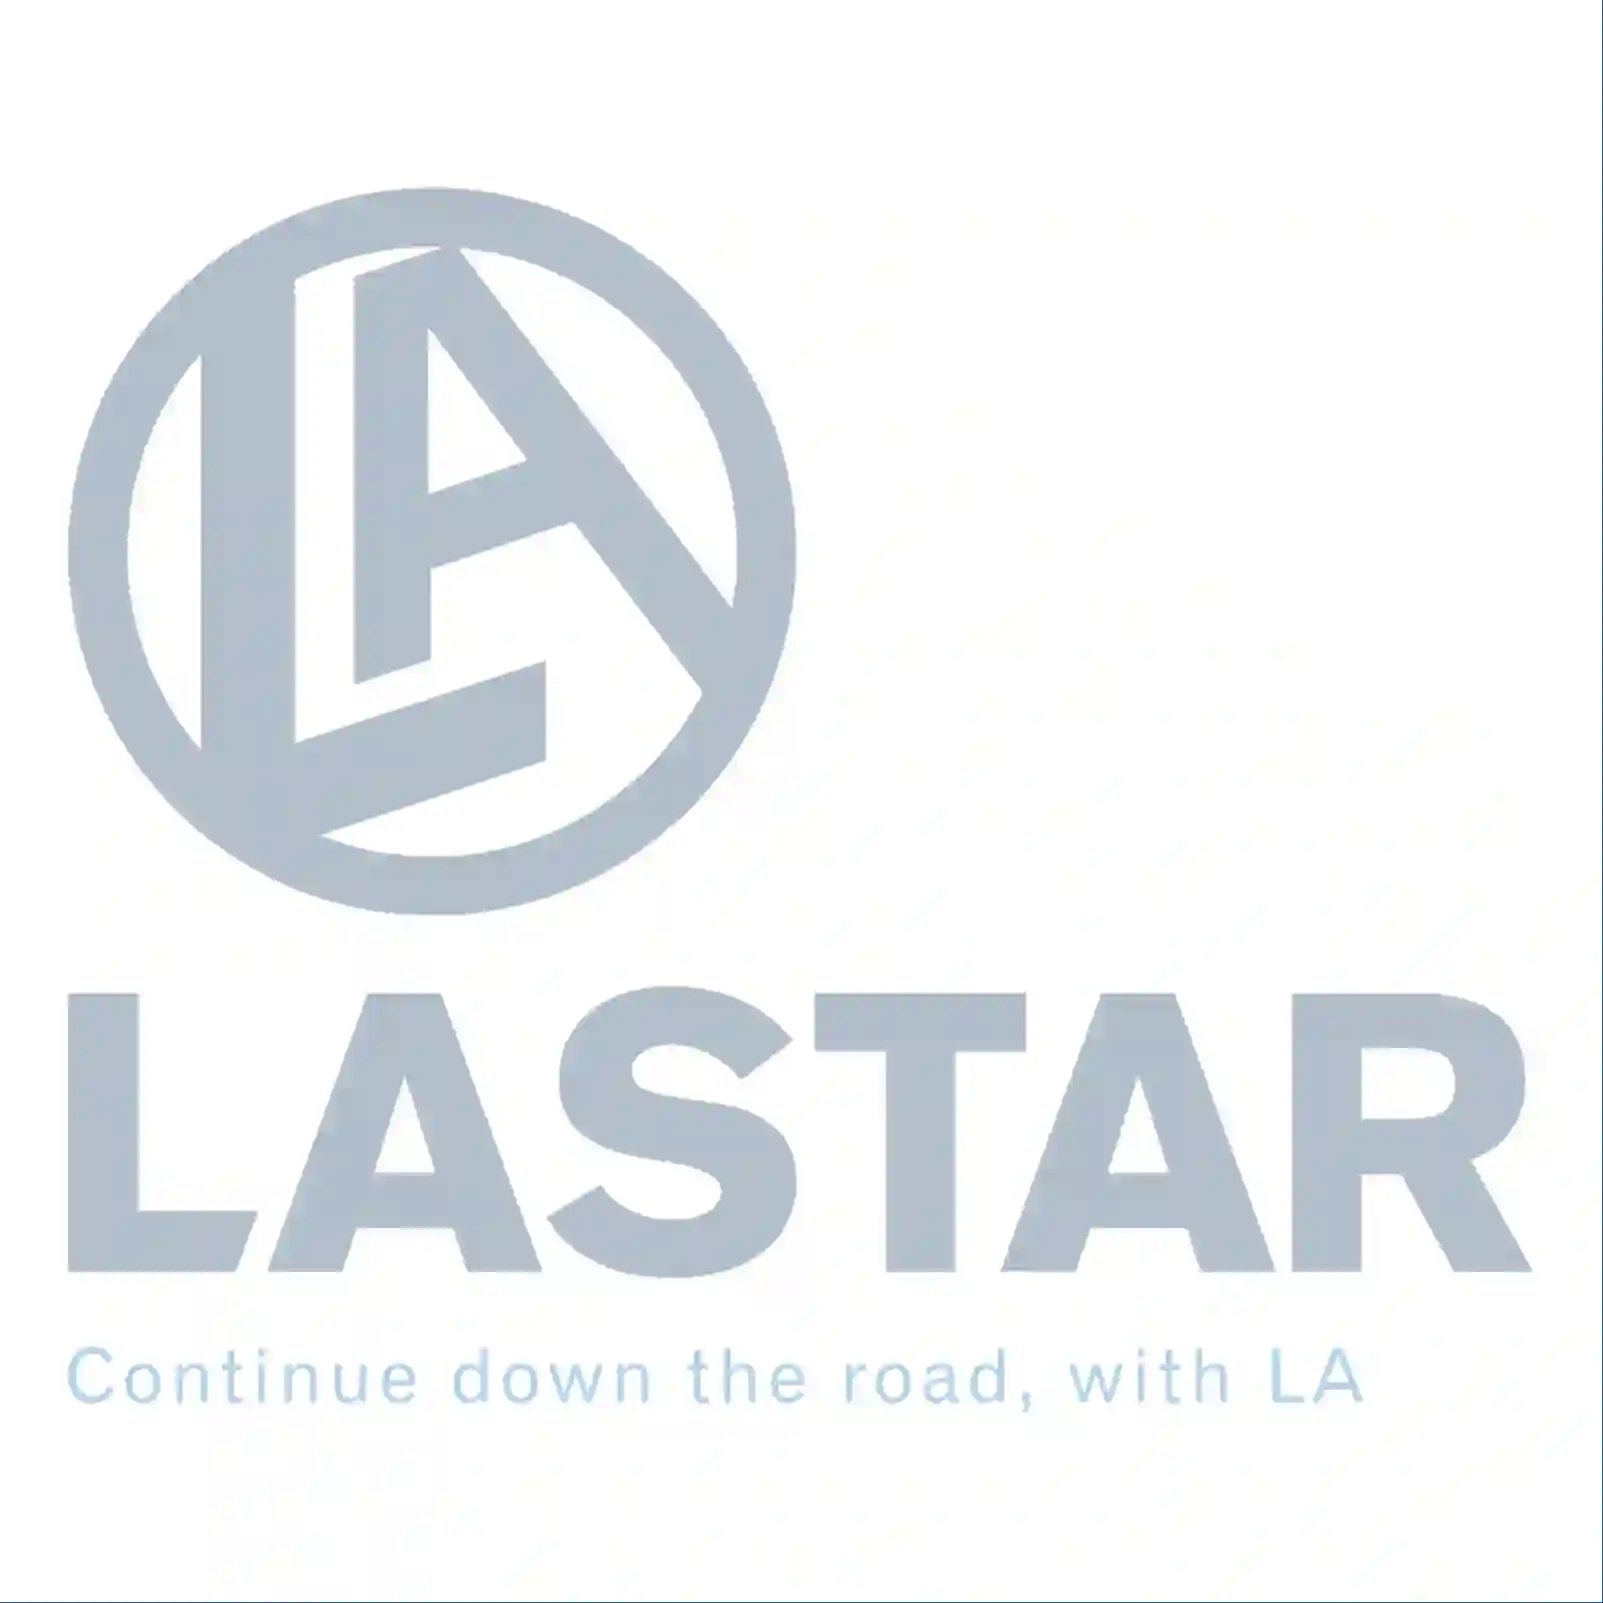  Work lamp, clear || Lastar Spare Part | Truck Spare Parts, Auotomotive Spare Parts